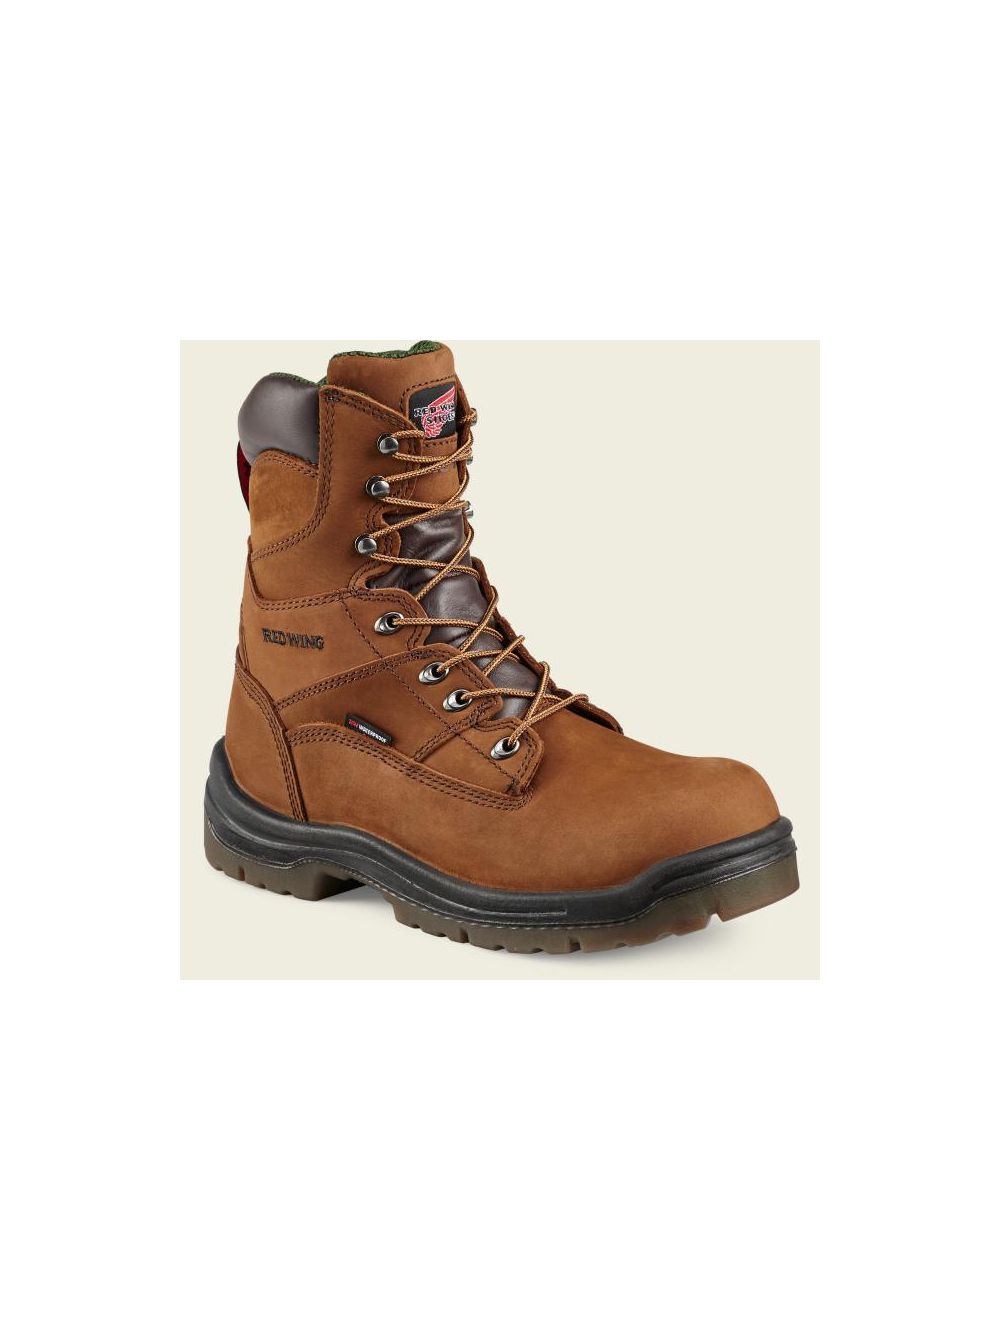 Red Wing 2202 Mens Safety Toe Work Boots Size 11 New India